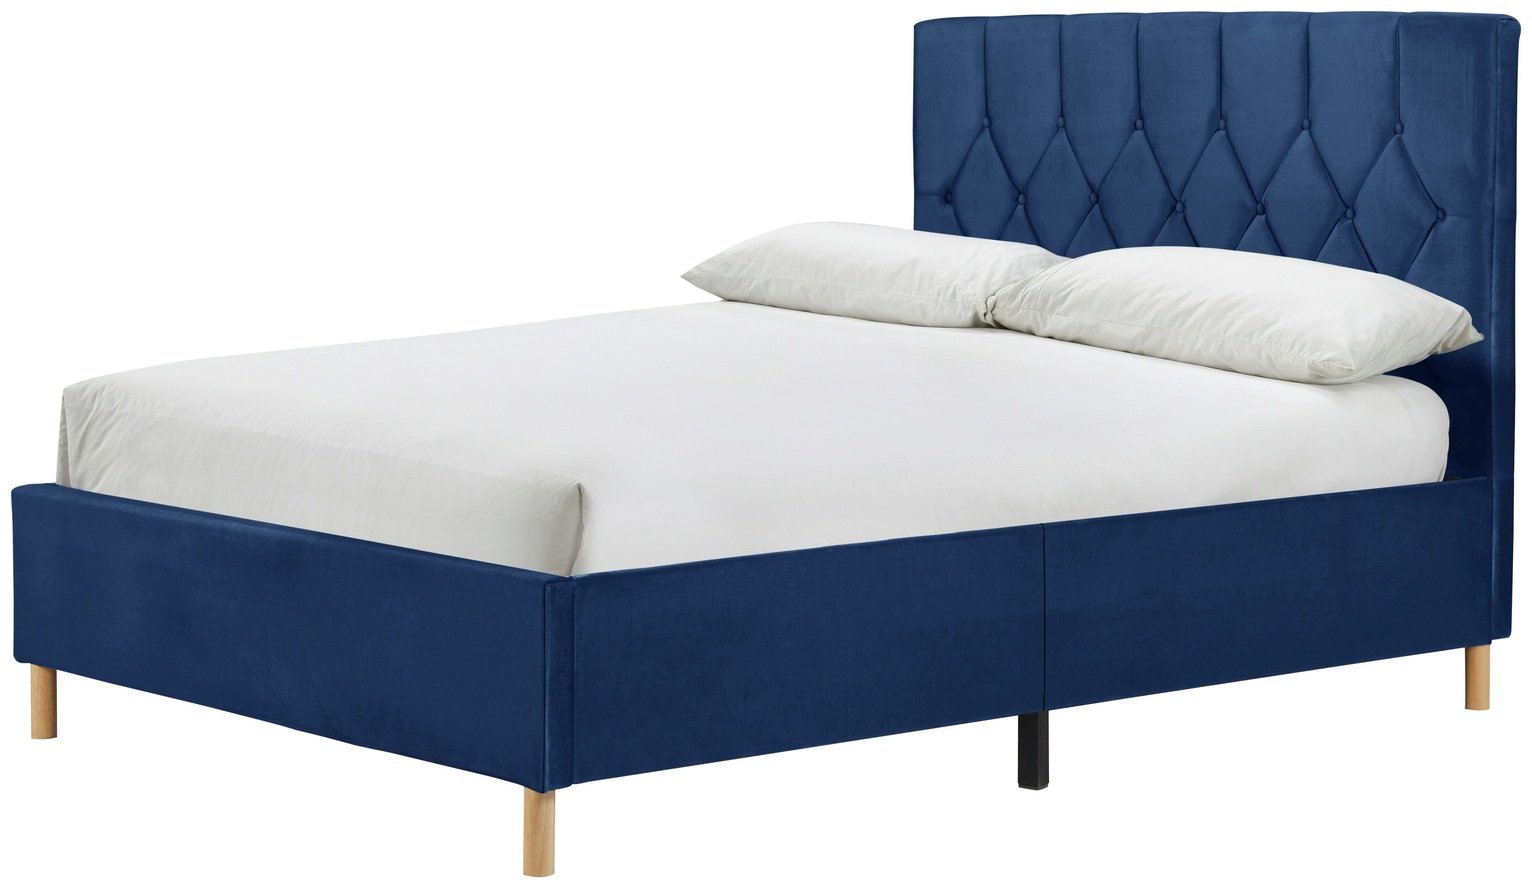 Birlea Loxley Double Fabric Bed Frame - Blue